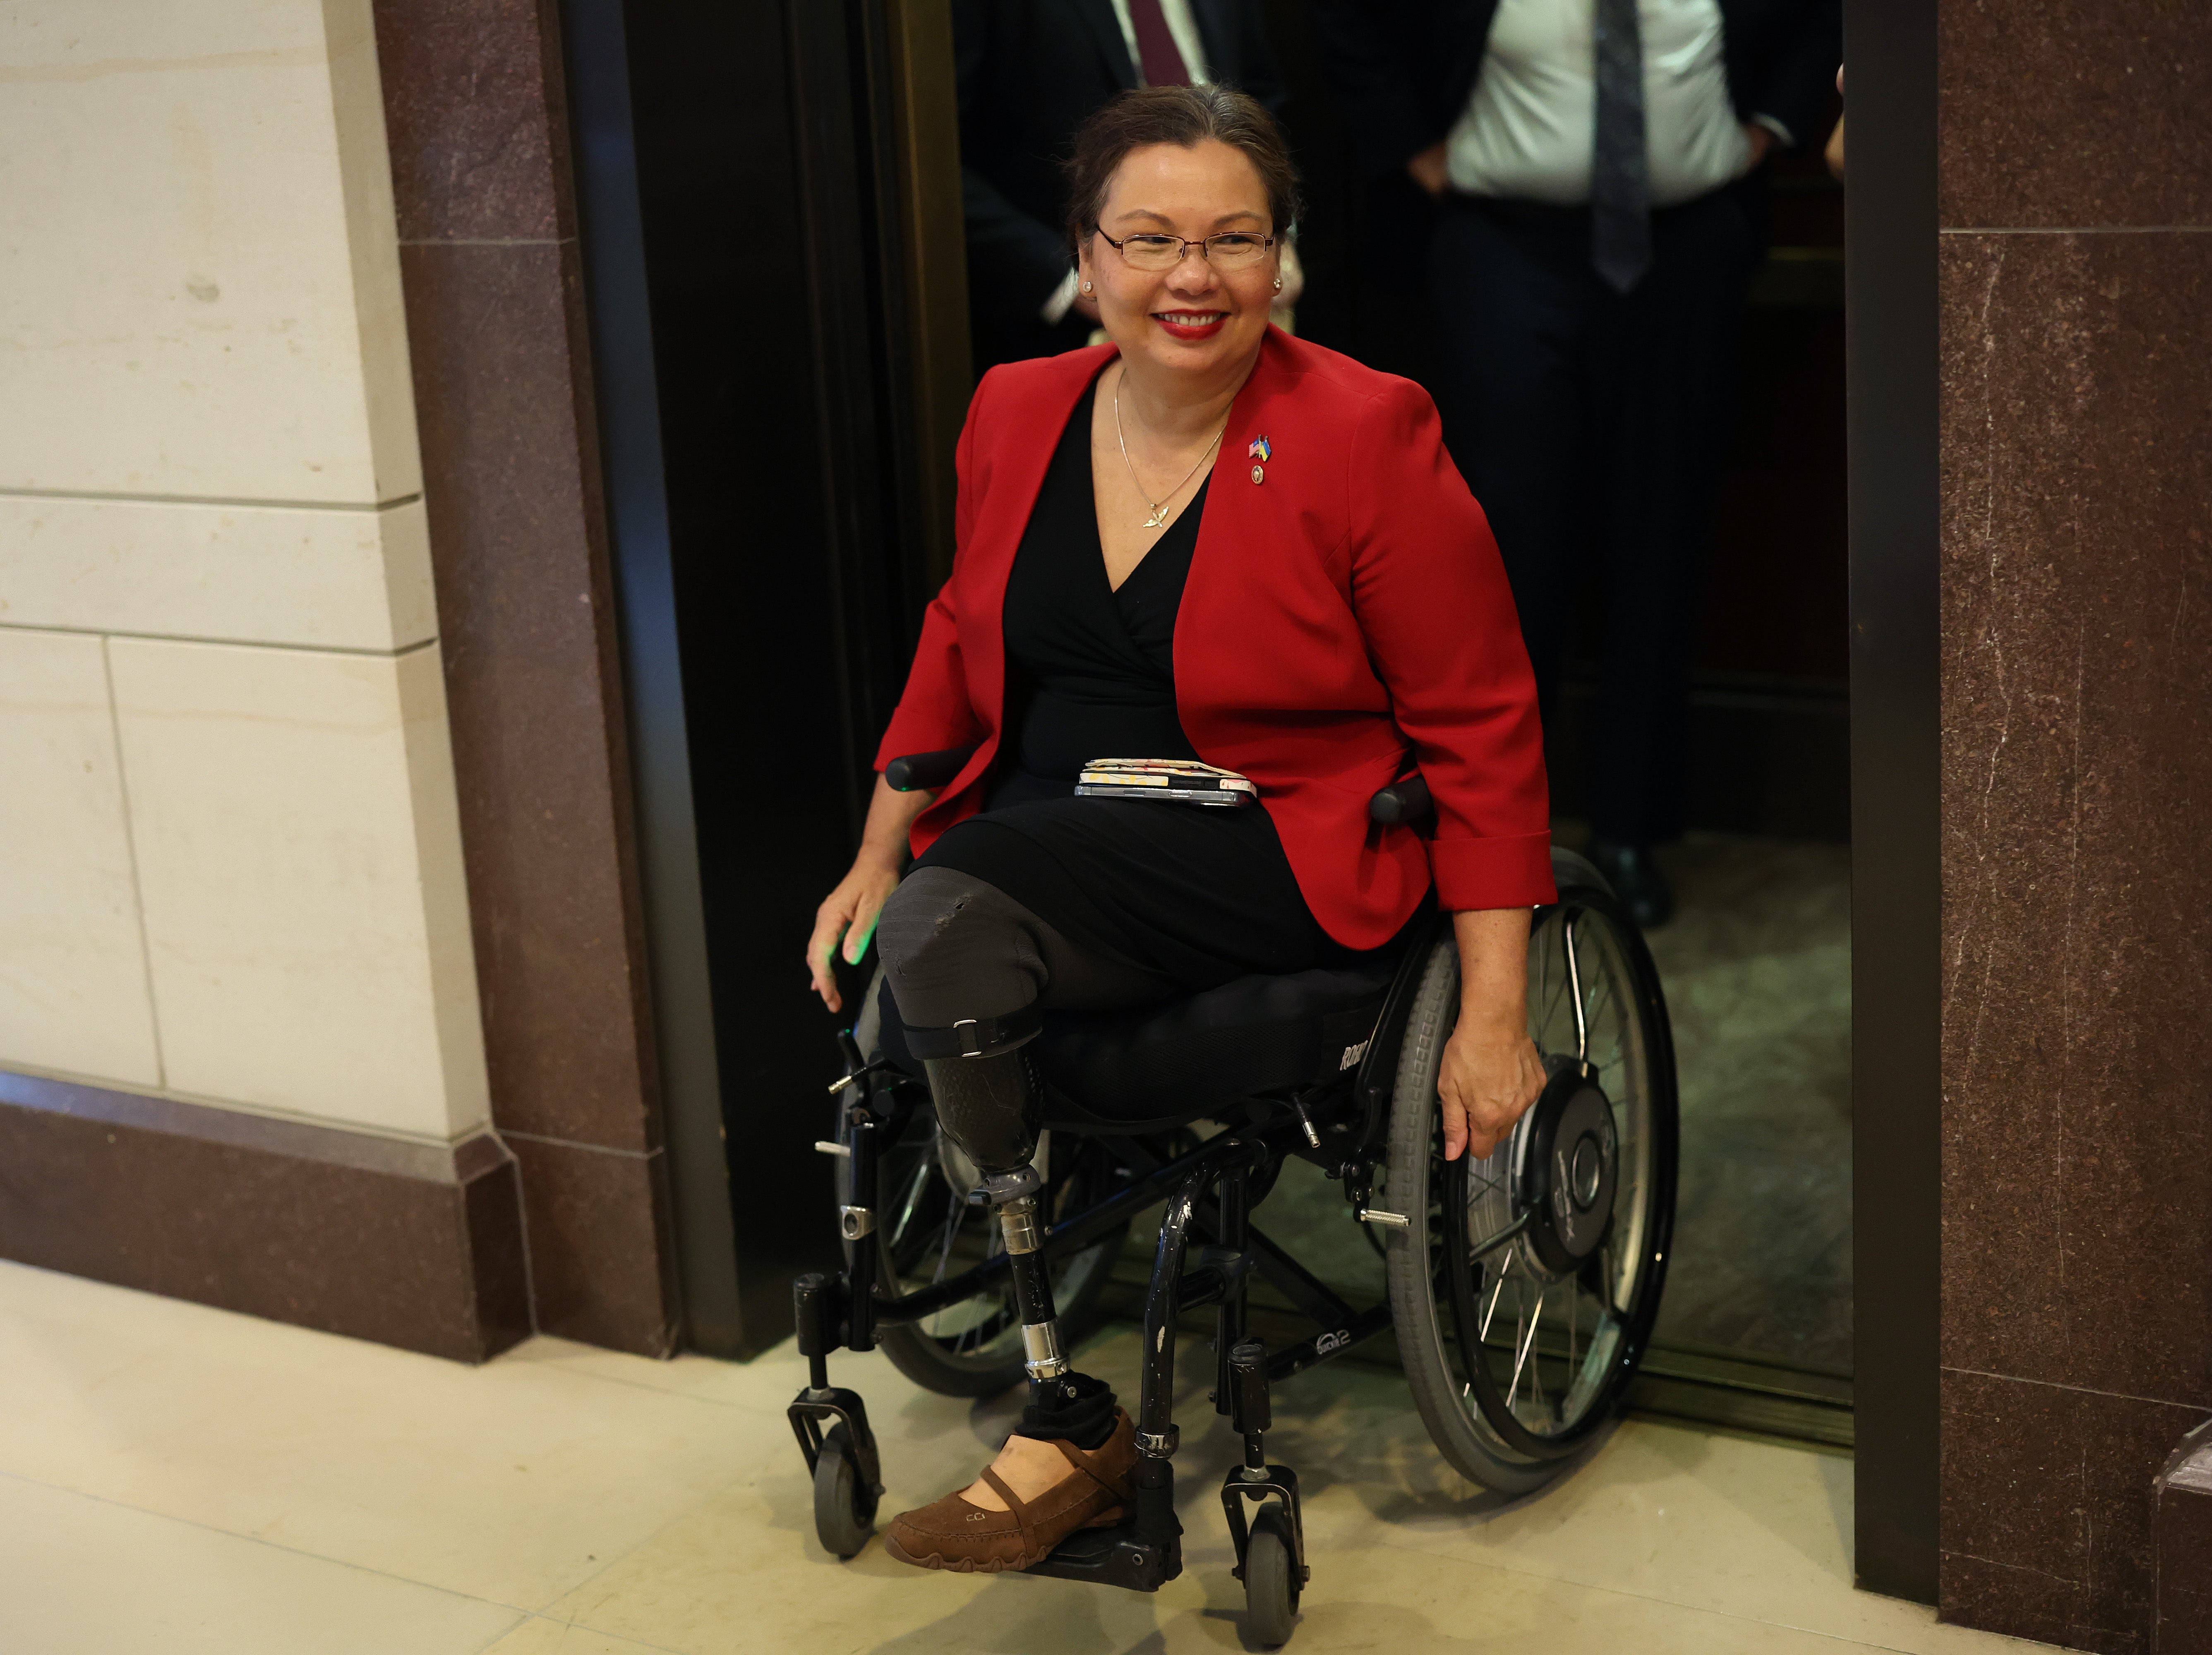 WASHINGTON, DC - SEPTEMBER 20: Sen. Tammy Duckworth (D-IL) arrives for a briefing on Ukraine at the U.S. Capitol on September 20, 2023 in Washington, DC. The Illinois Senator uses a wheelchair and has prosthetic legs after her helicopter was shot down in Iraq.